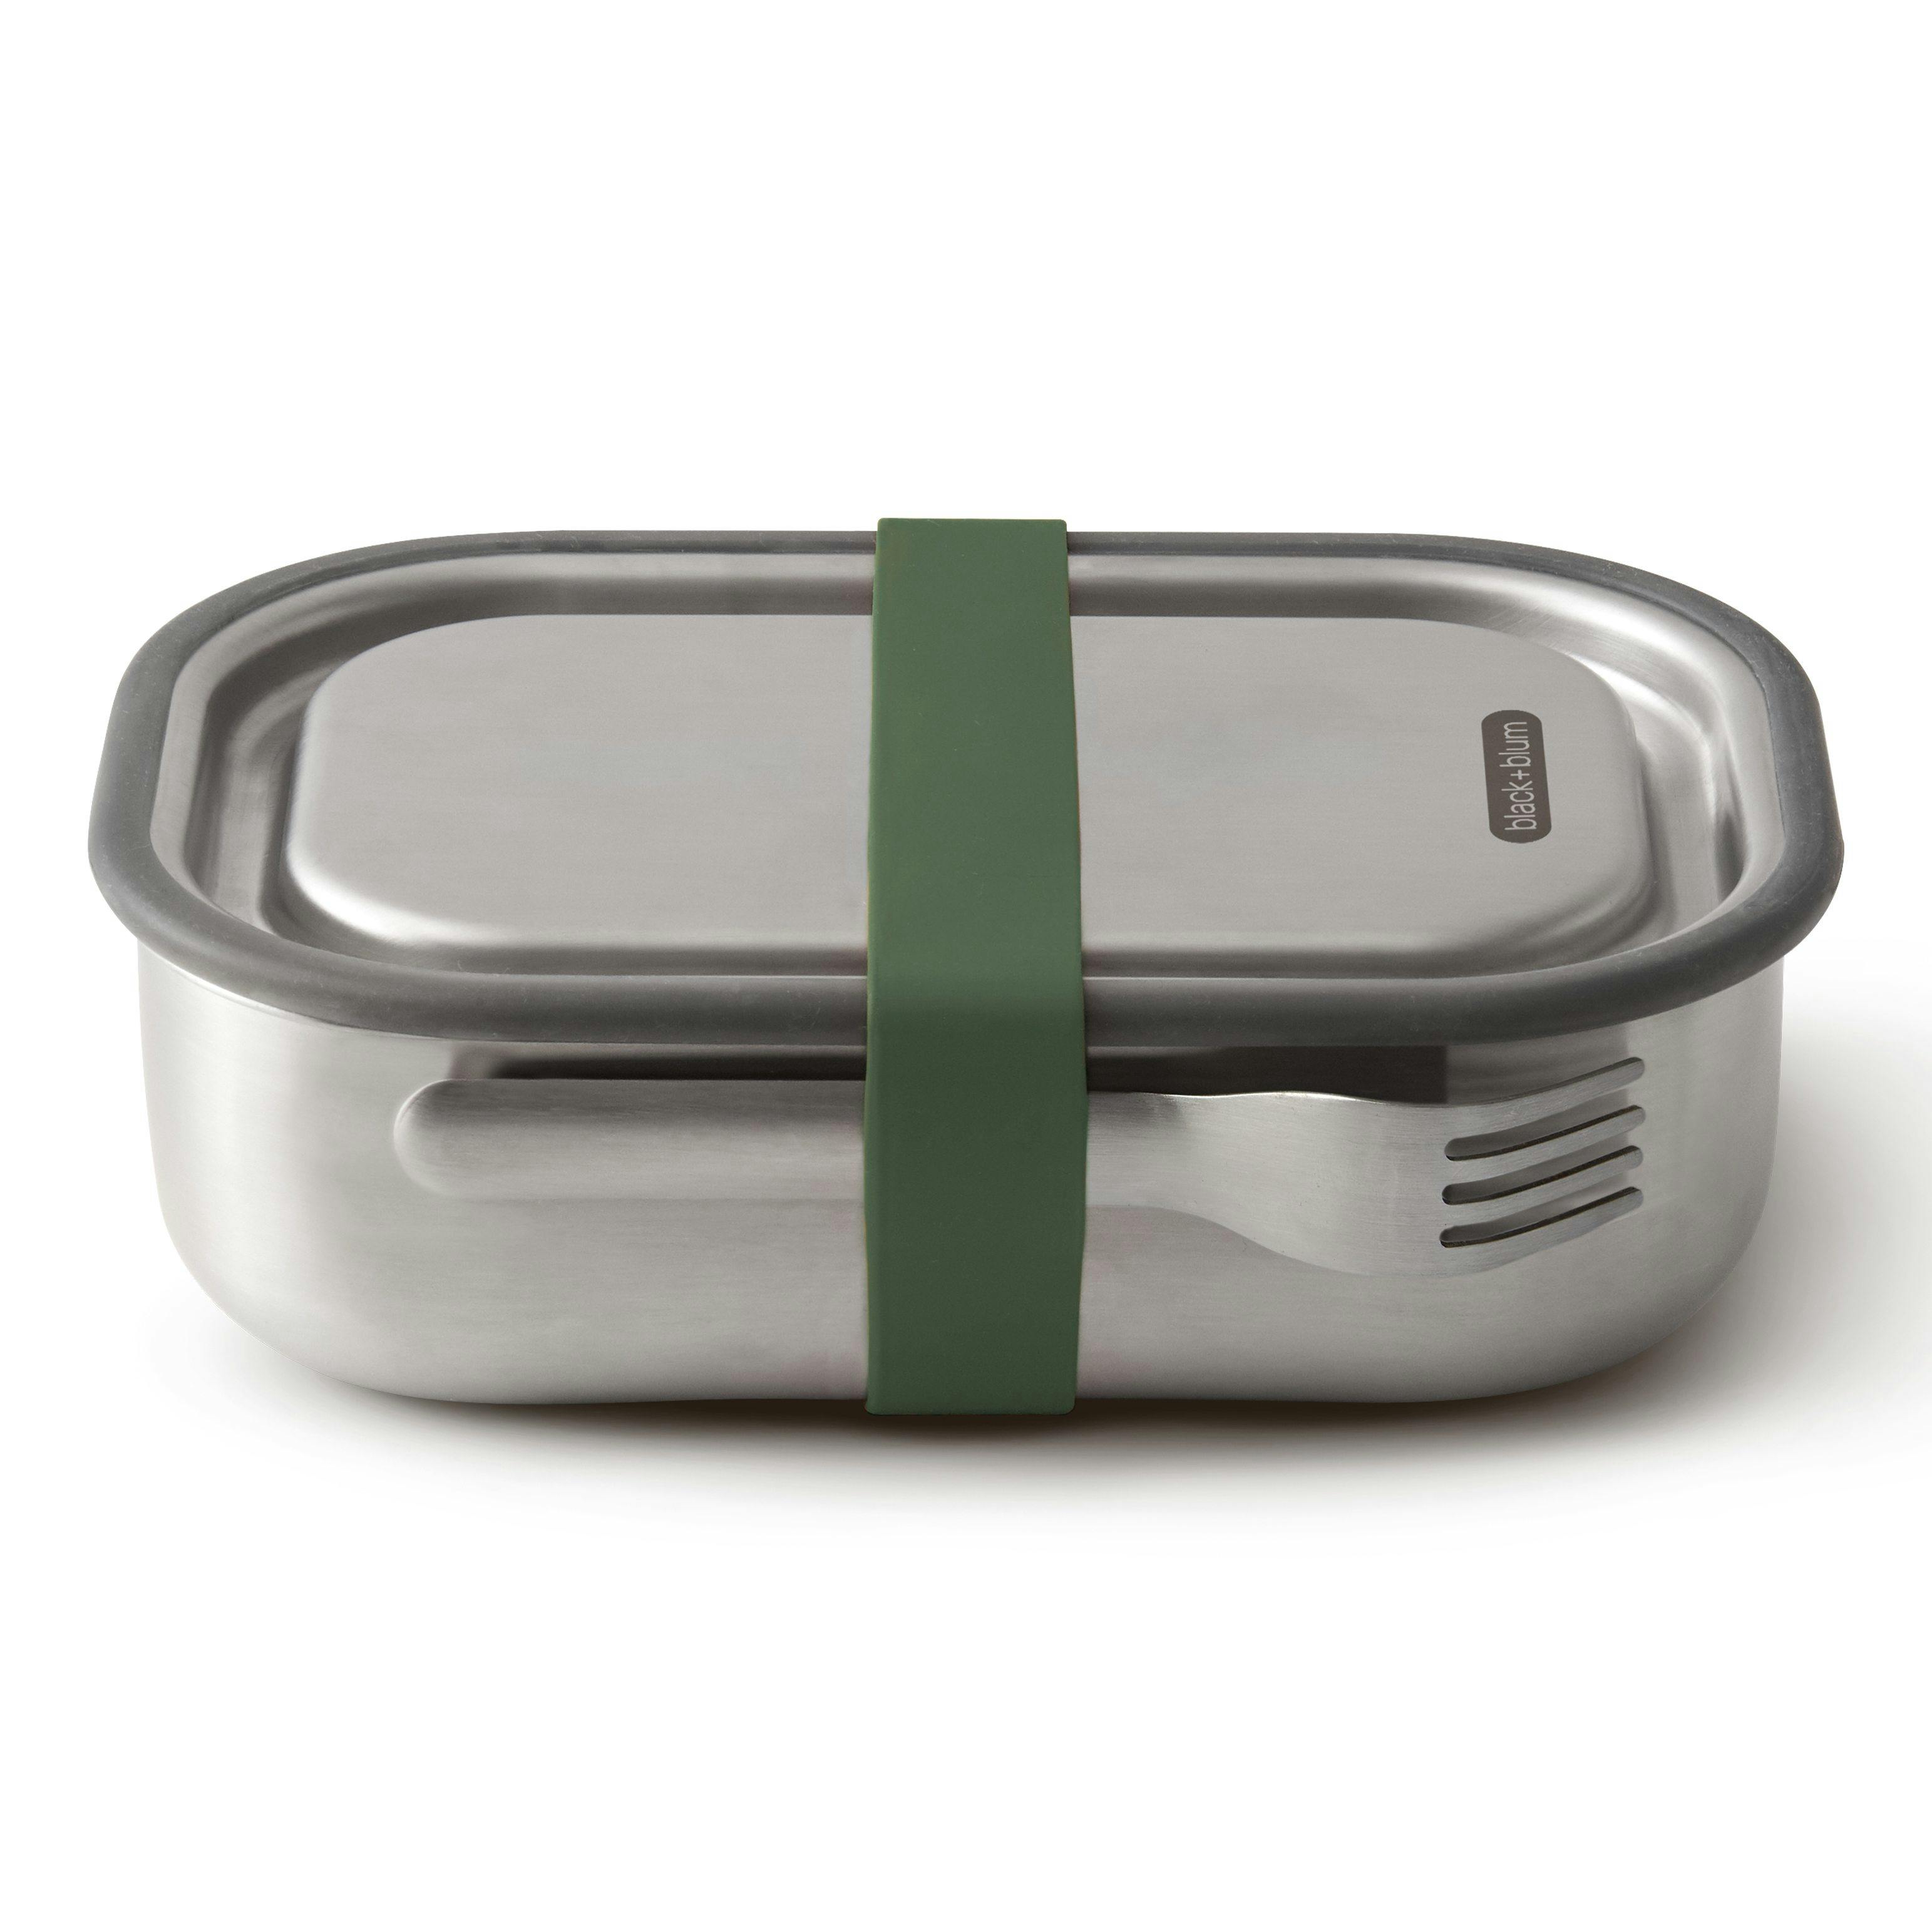 Metal Lunch Food Container, Stainless Steel Lunch Box Sealed Spill